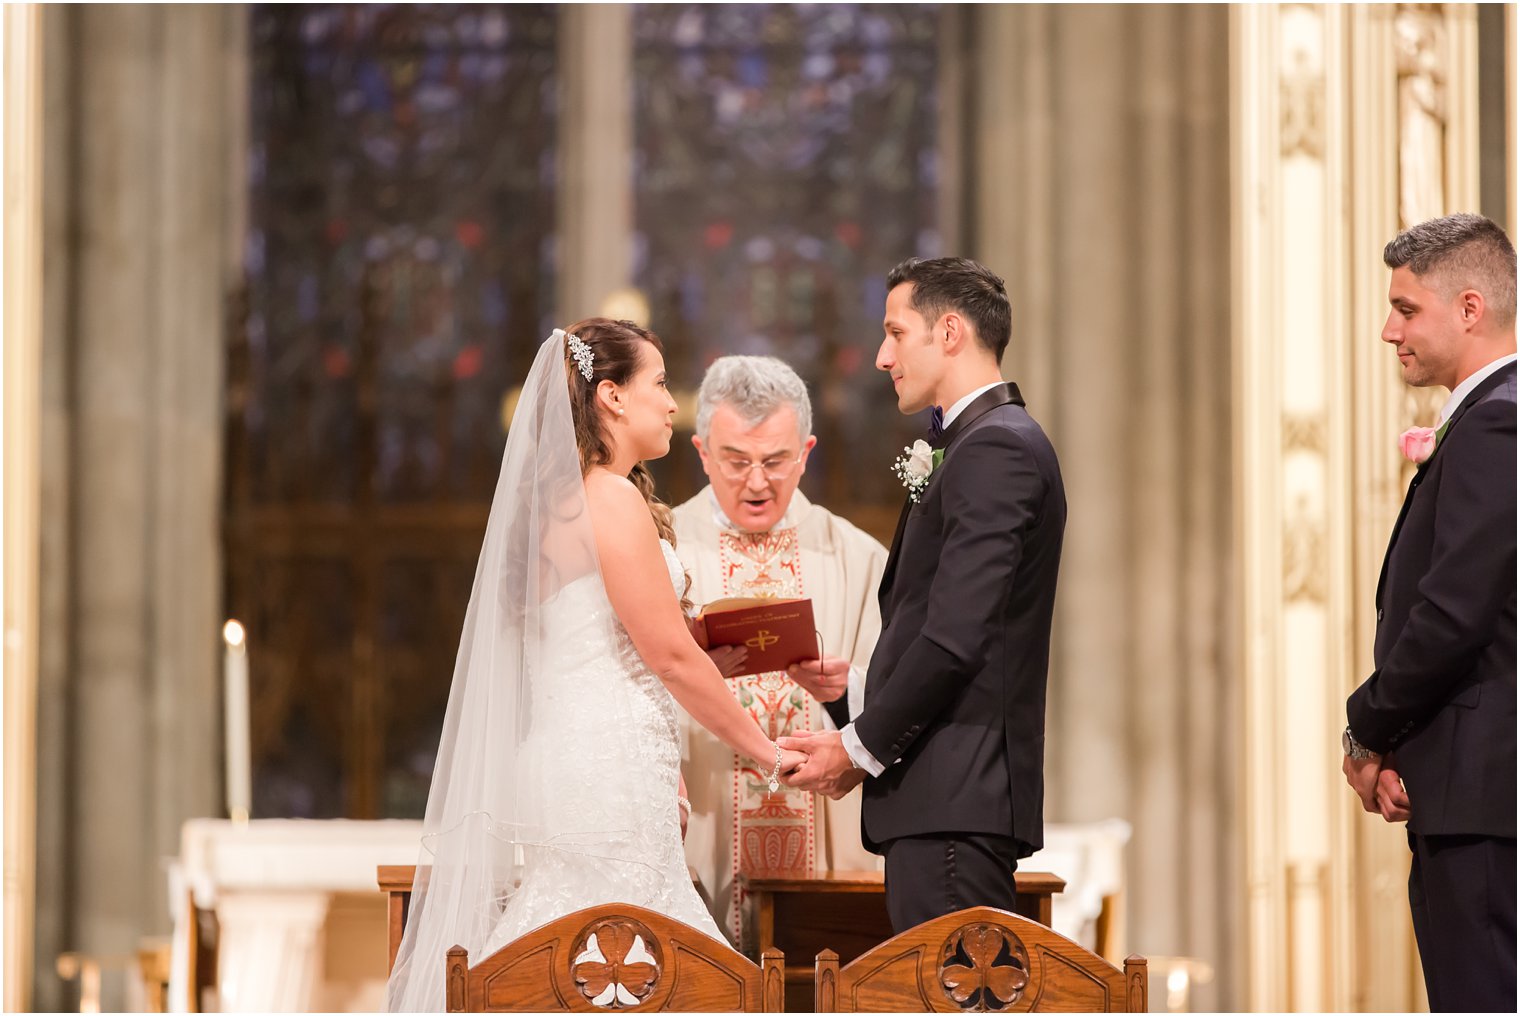 Bride and groom exchange of vows at St. Patrick's Cathedral | Photo by Idalia Photography